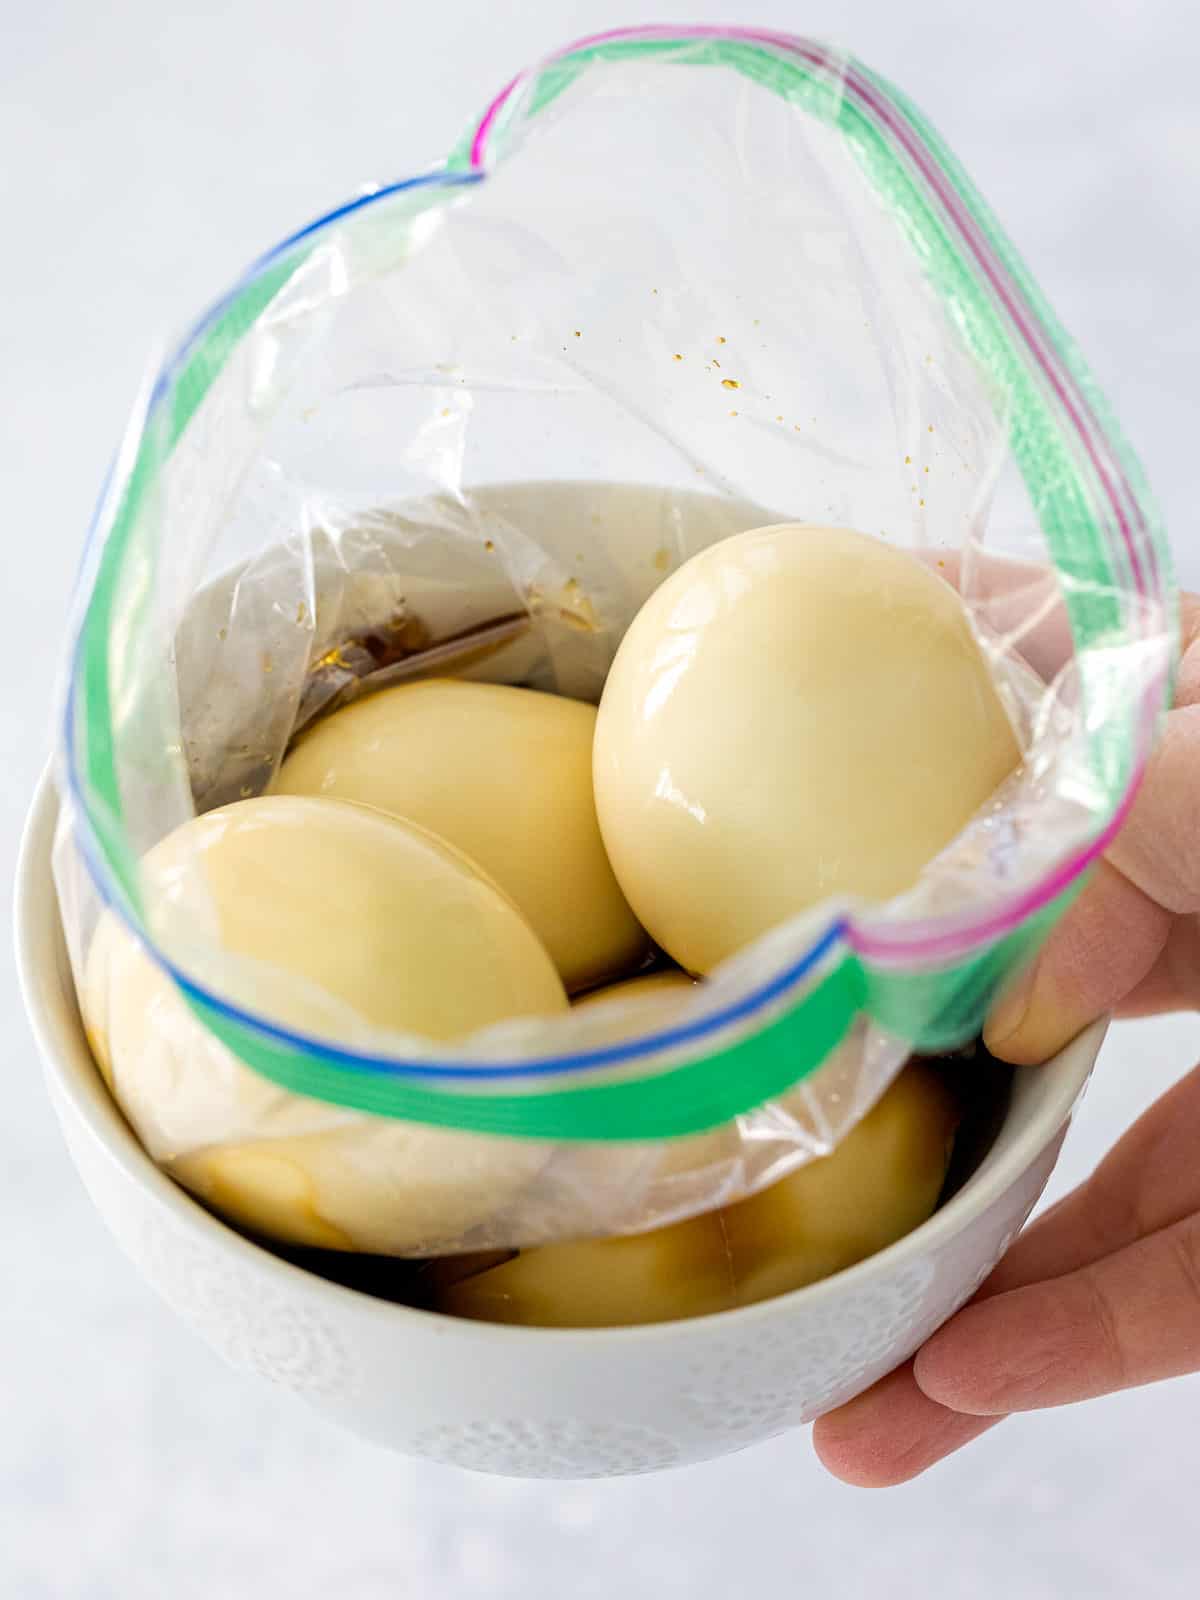 Soft boiled eggs in a soy sauce and mirin marinade inside a plastic bag set in a small bowl.